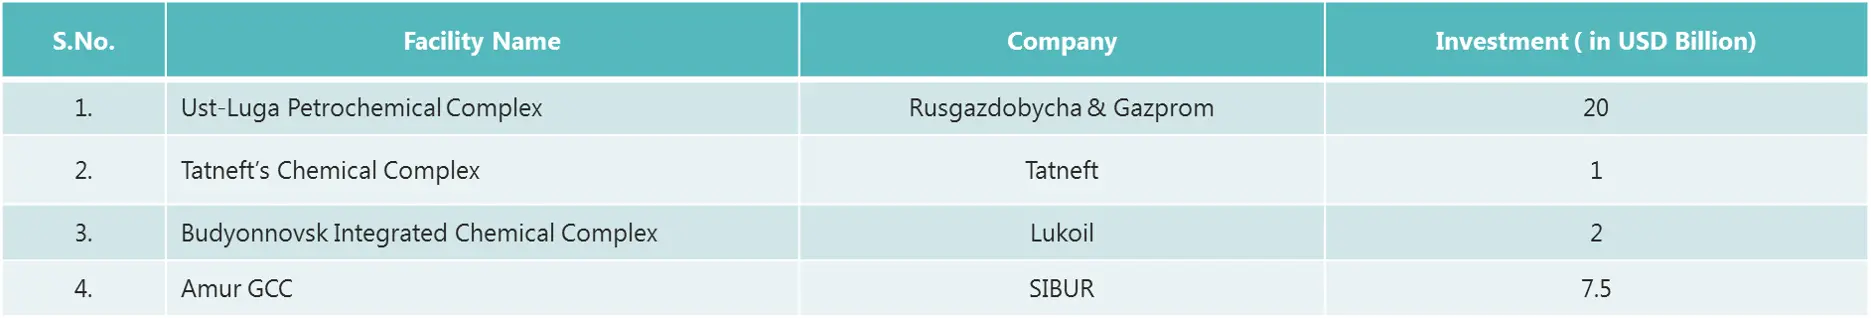 Russia Petrochemical Projects.png